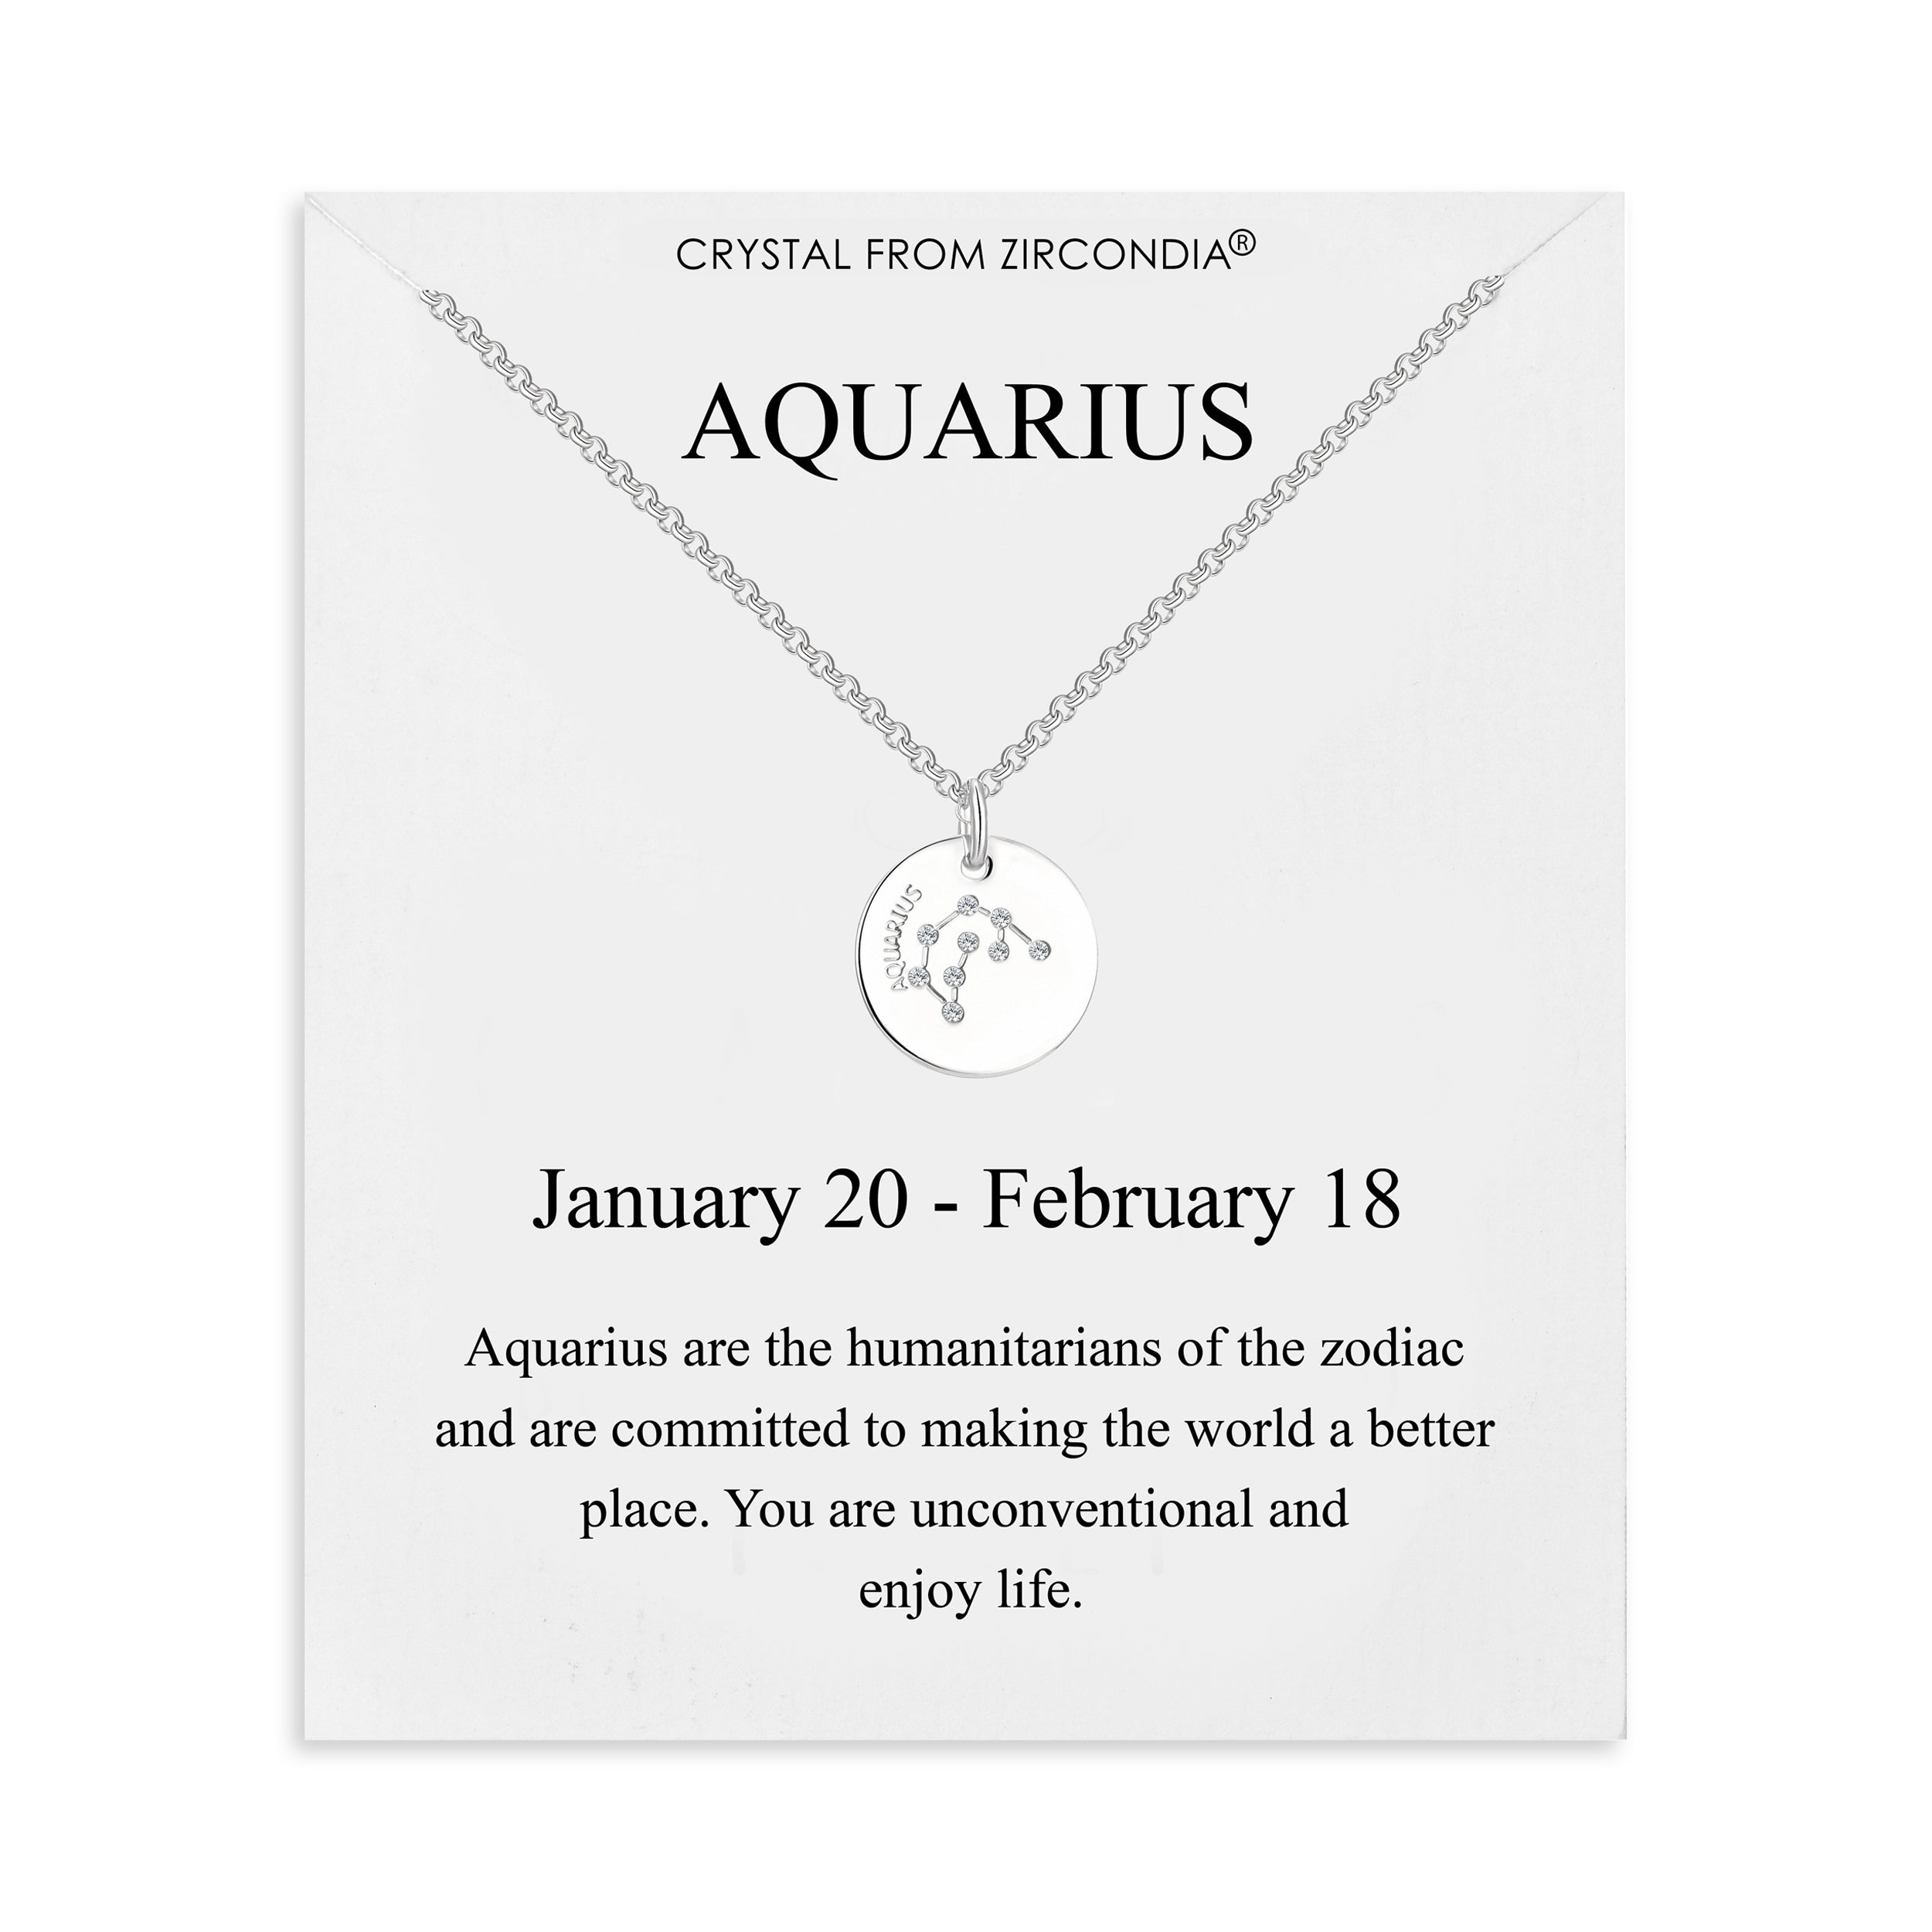 Aquarius Zodiac Star Sign Disc Necklace Created with Zircondia® Crystals